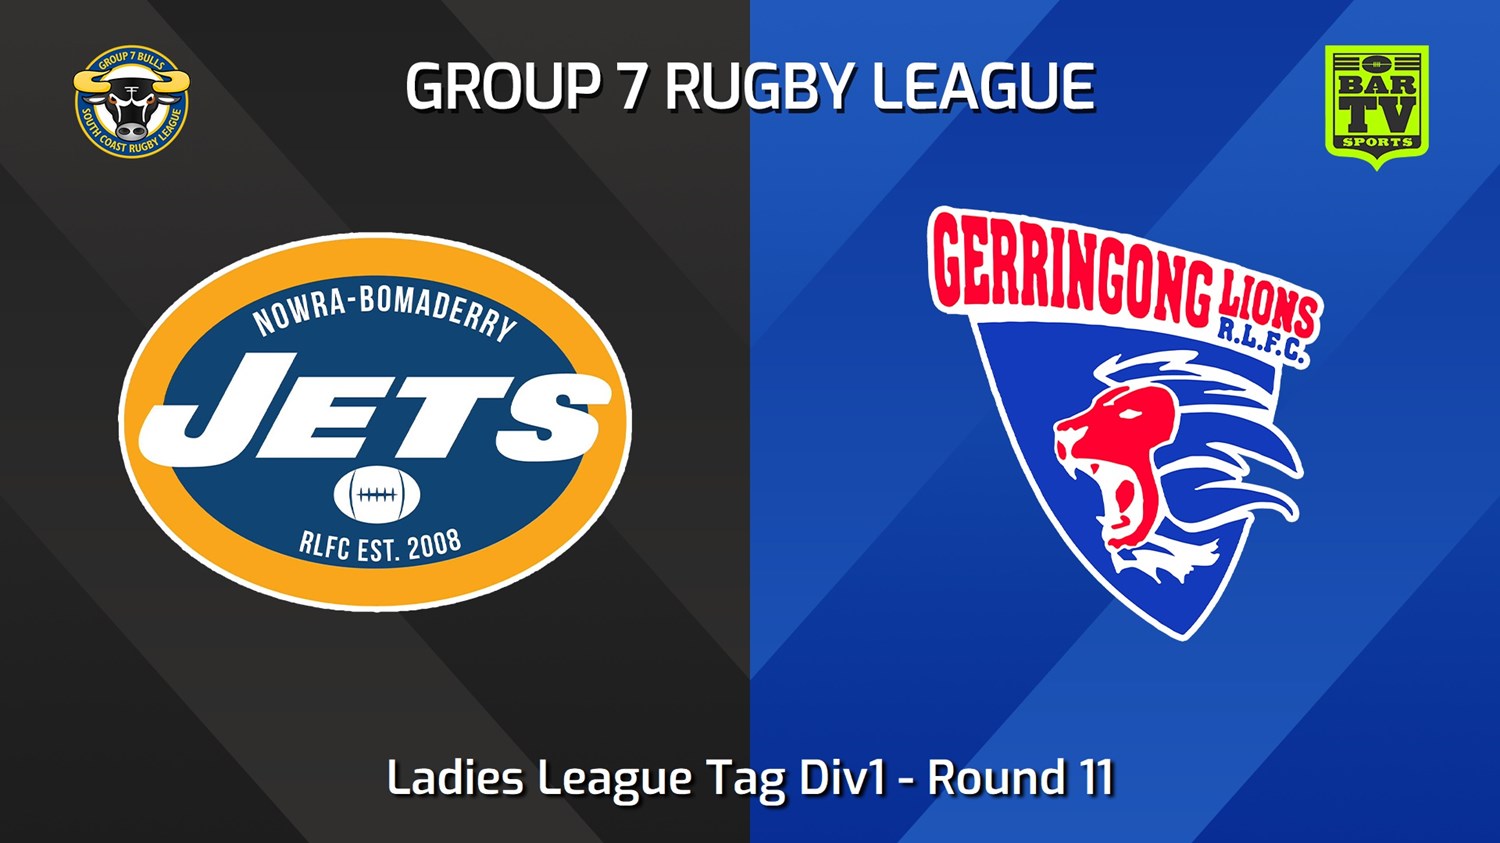 240623-video-South Coast Round 11 - Ladies League Tag Div1 - Nowra-Bomaderry Jets v Gerringong Lions Slate Image